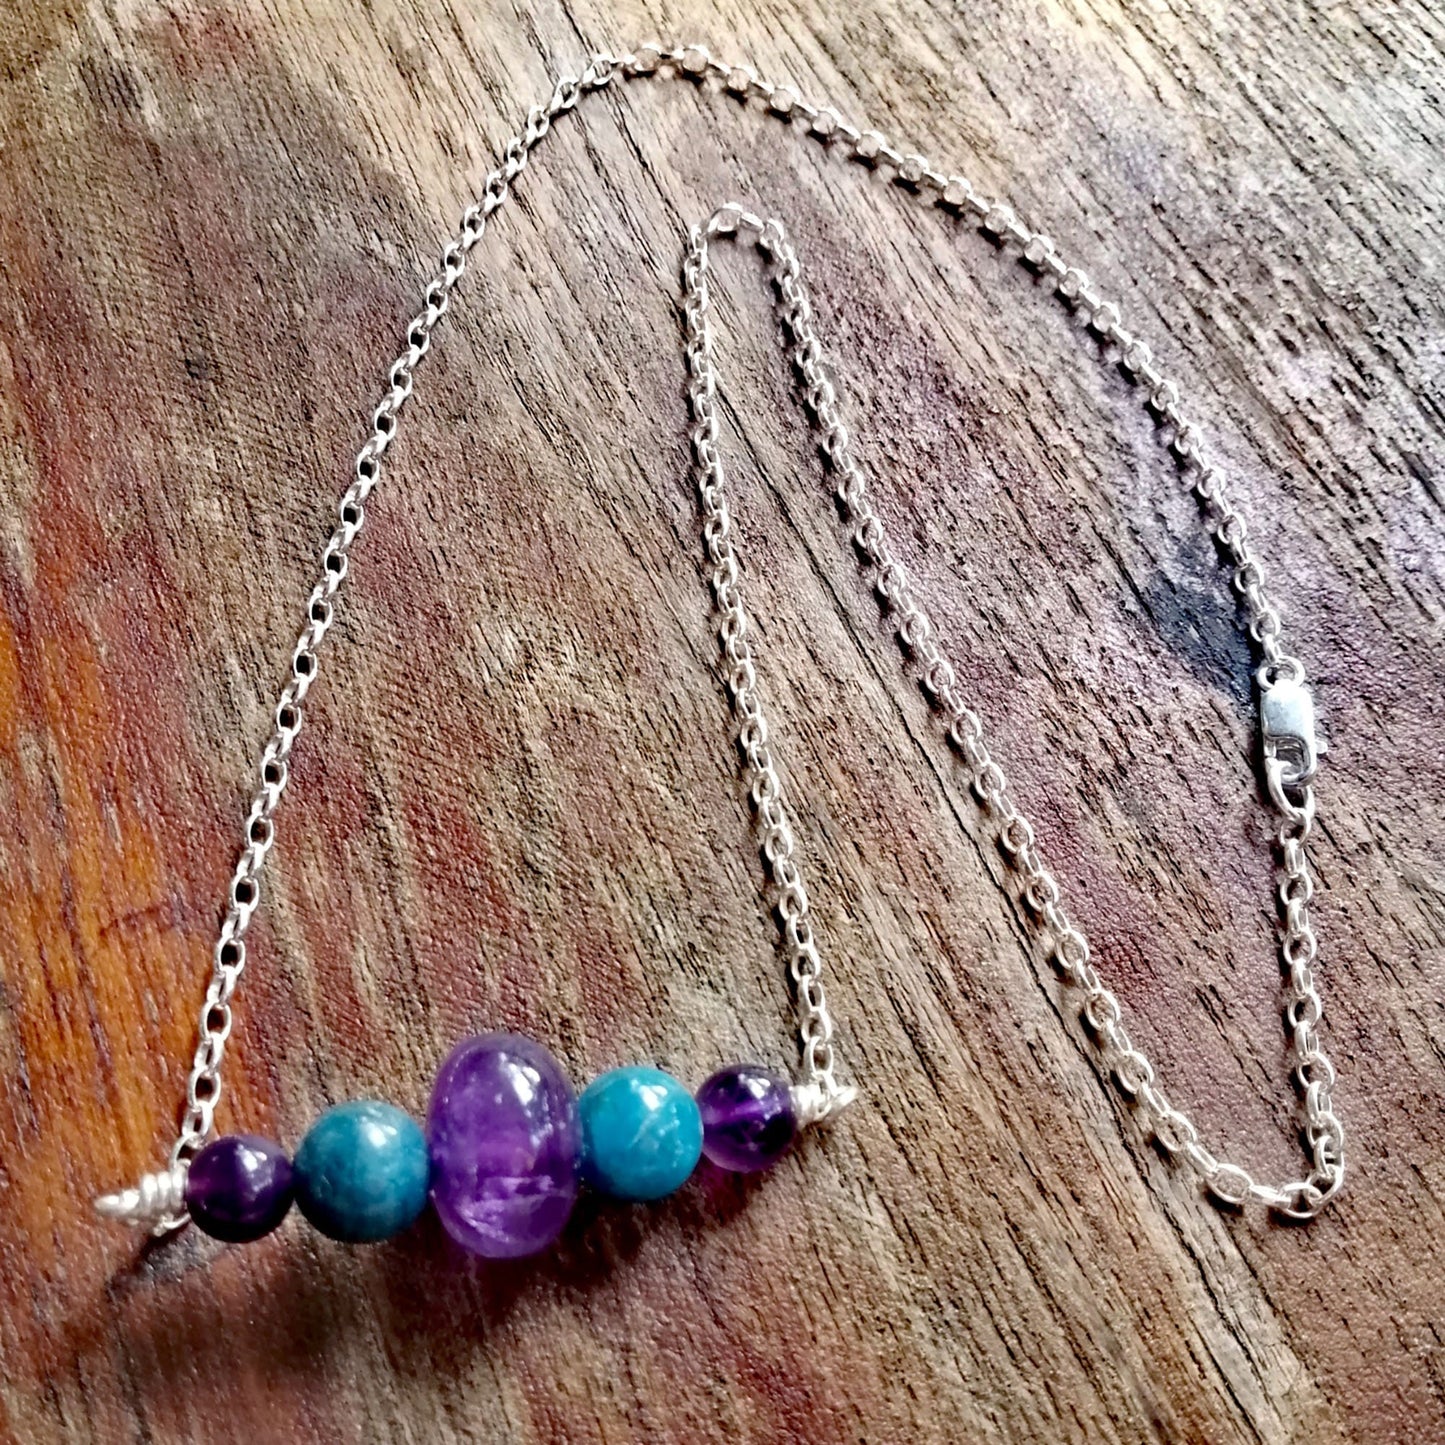 Amethyst and Apatite Necklace - Fifth and Sixth Chakras - Know yourself as you speak your truth!